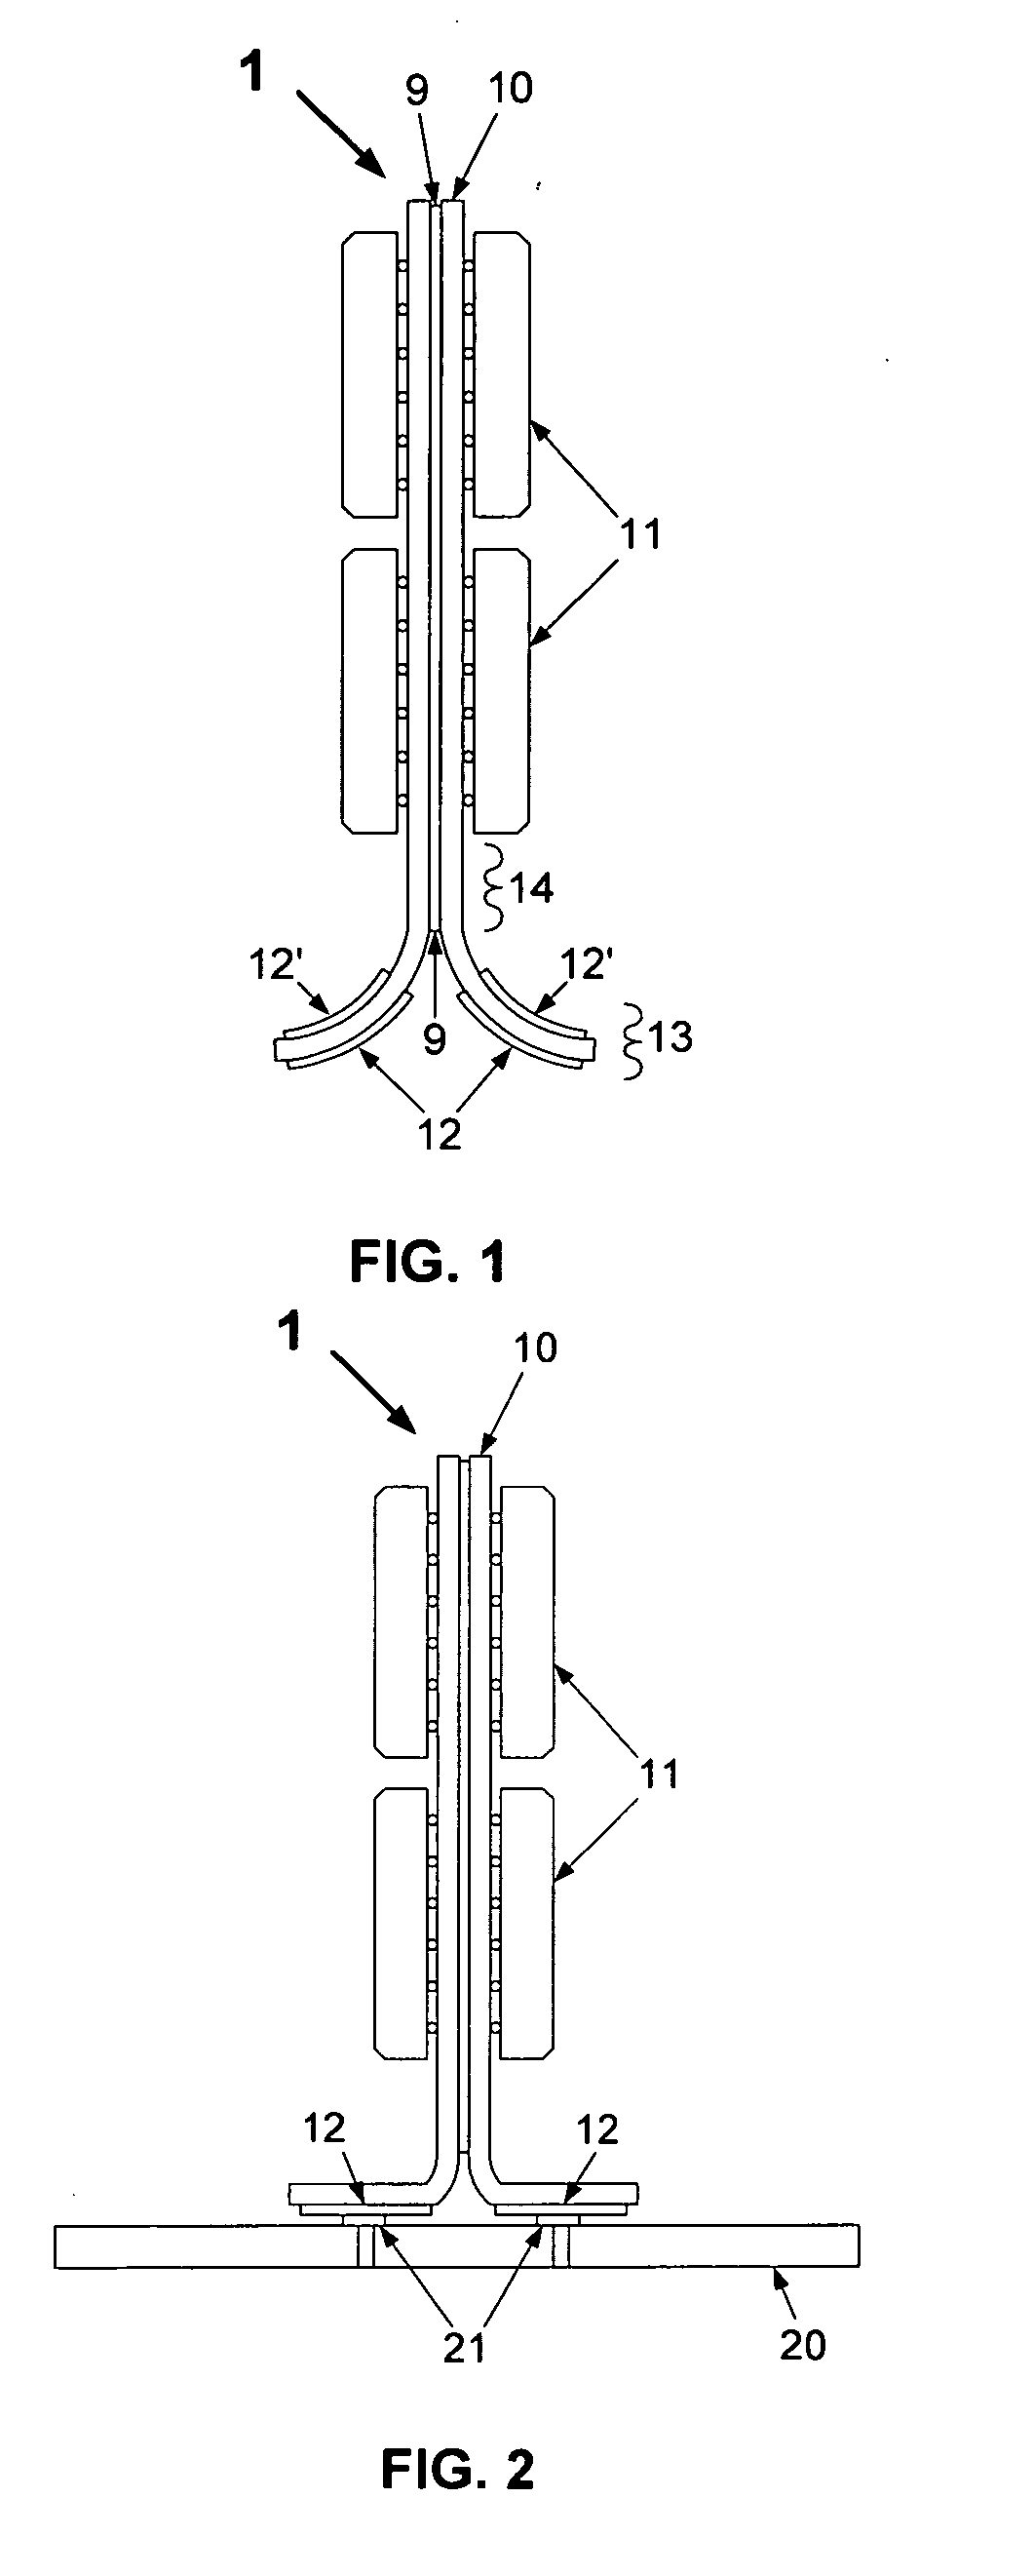 Method for making an electrical circuit